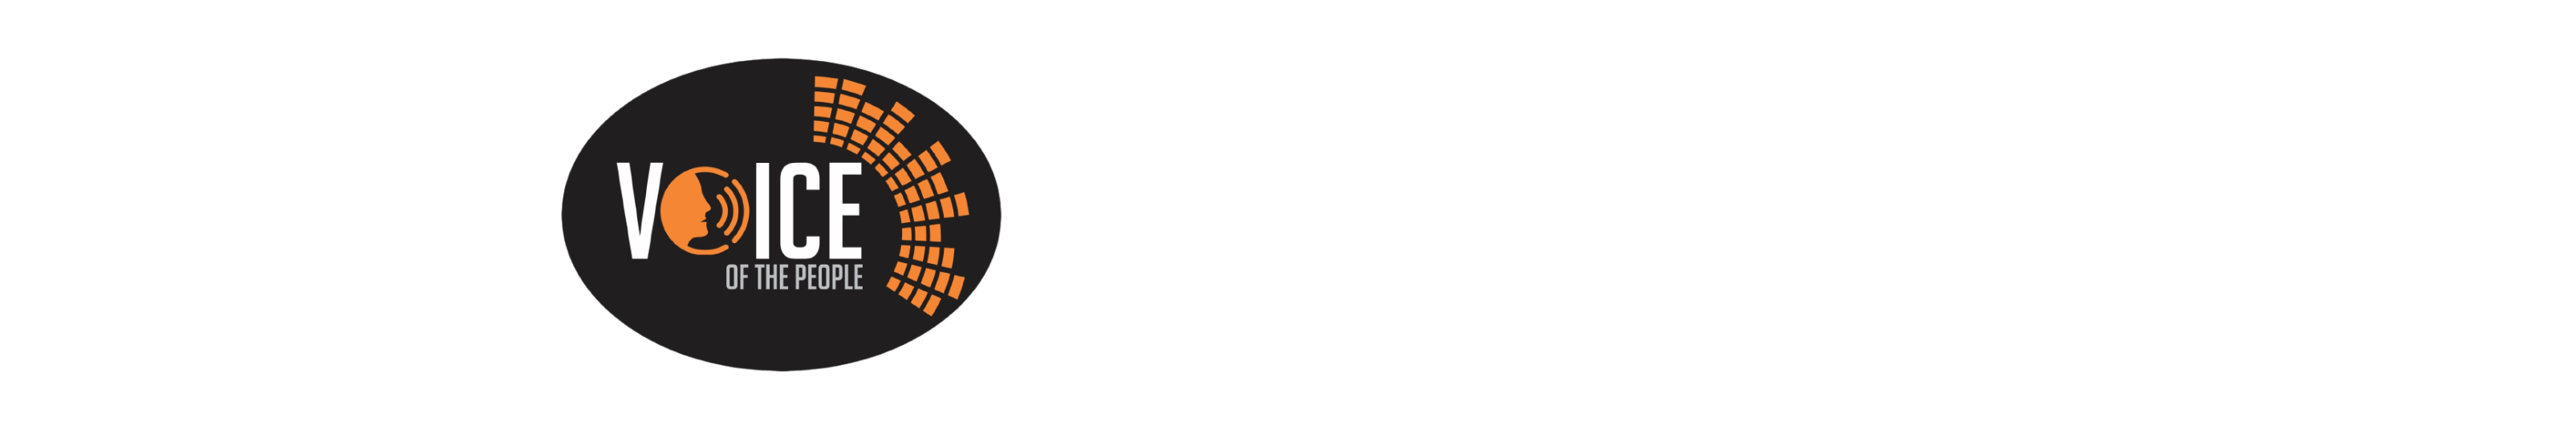 Voice of the People, VOP FM